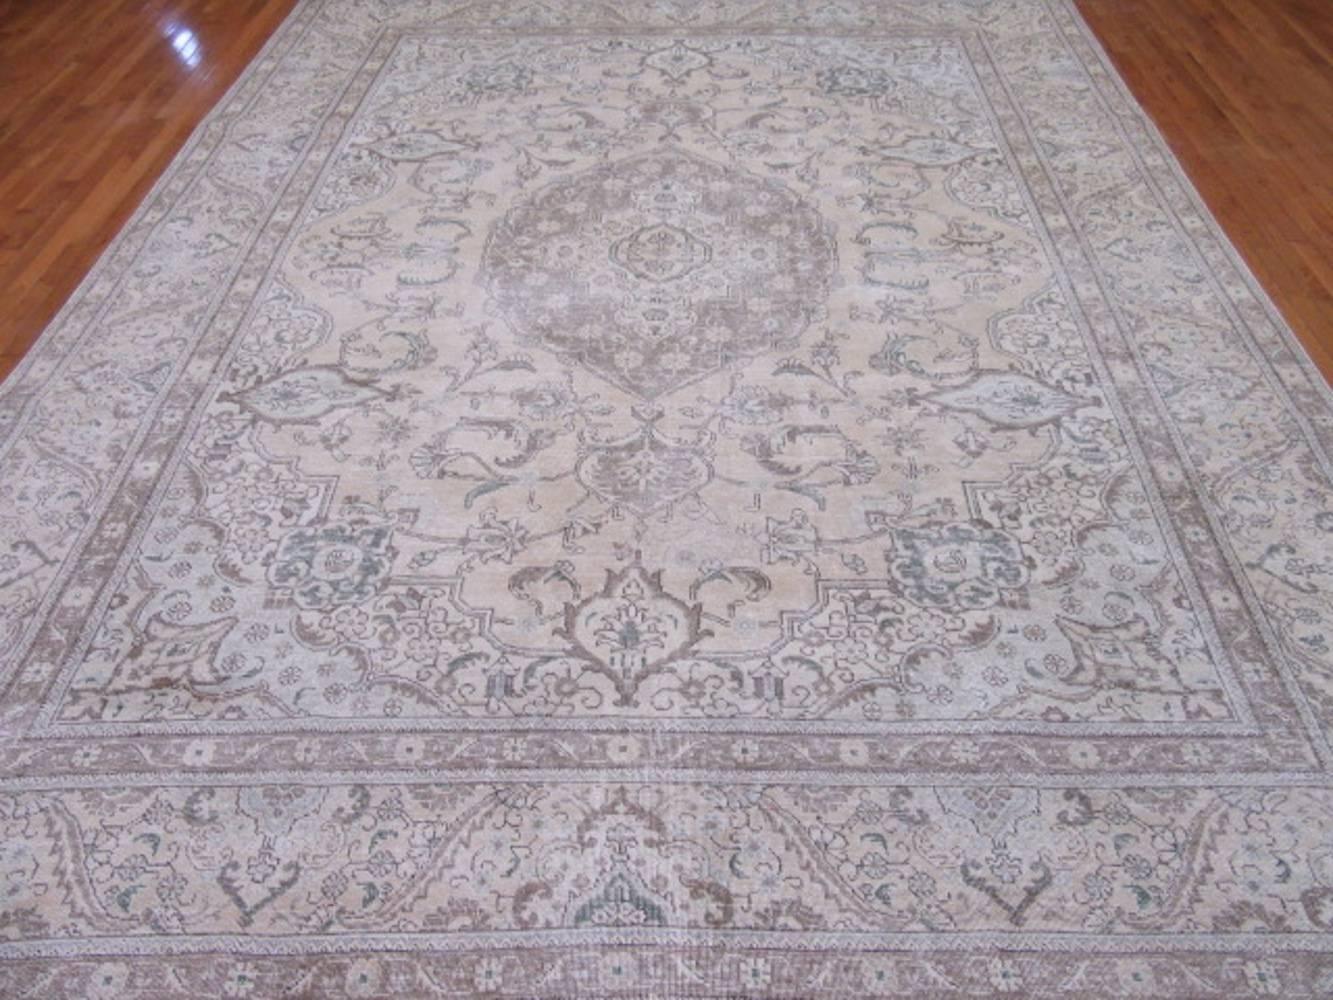 This is a beautiful hand-knotted distressed old Persian Tabriz rug. It has the cool contemporary and popular colors mixed with a more traditional pattern creating a great transitional rug to work with. It measures 9' 9'' x 12' 8'' and in good shape.